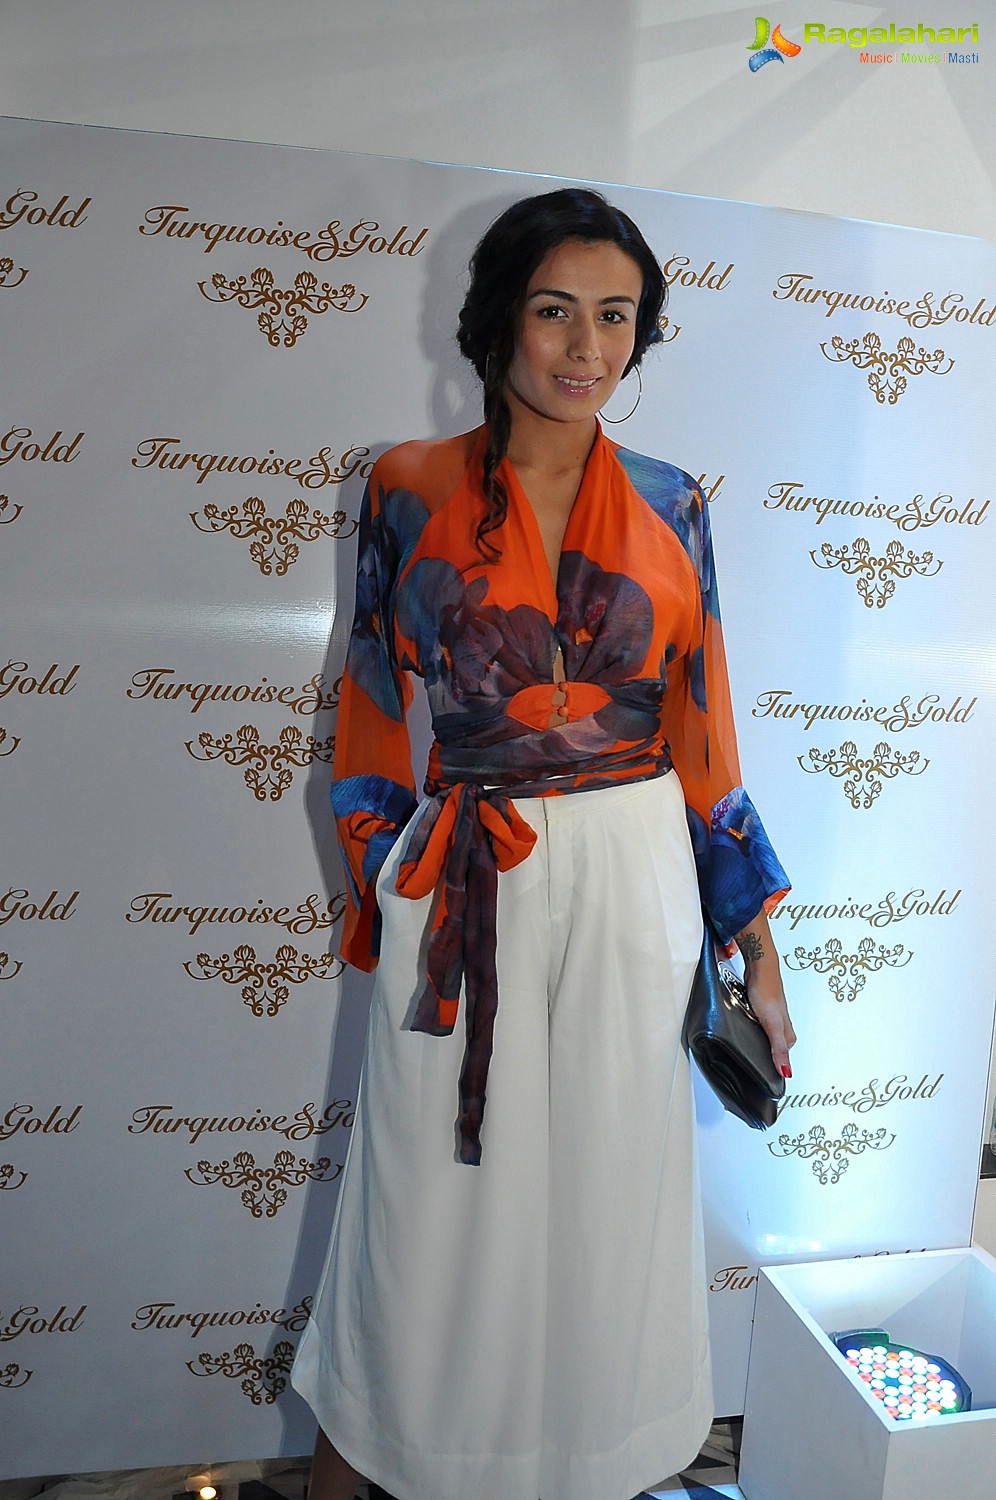 Turquoise and Gold Flagship Store Launch, Mumbai